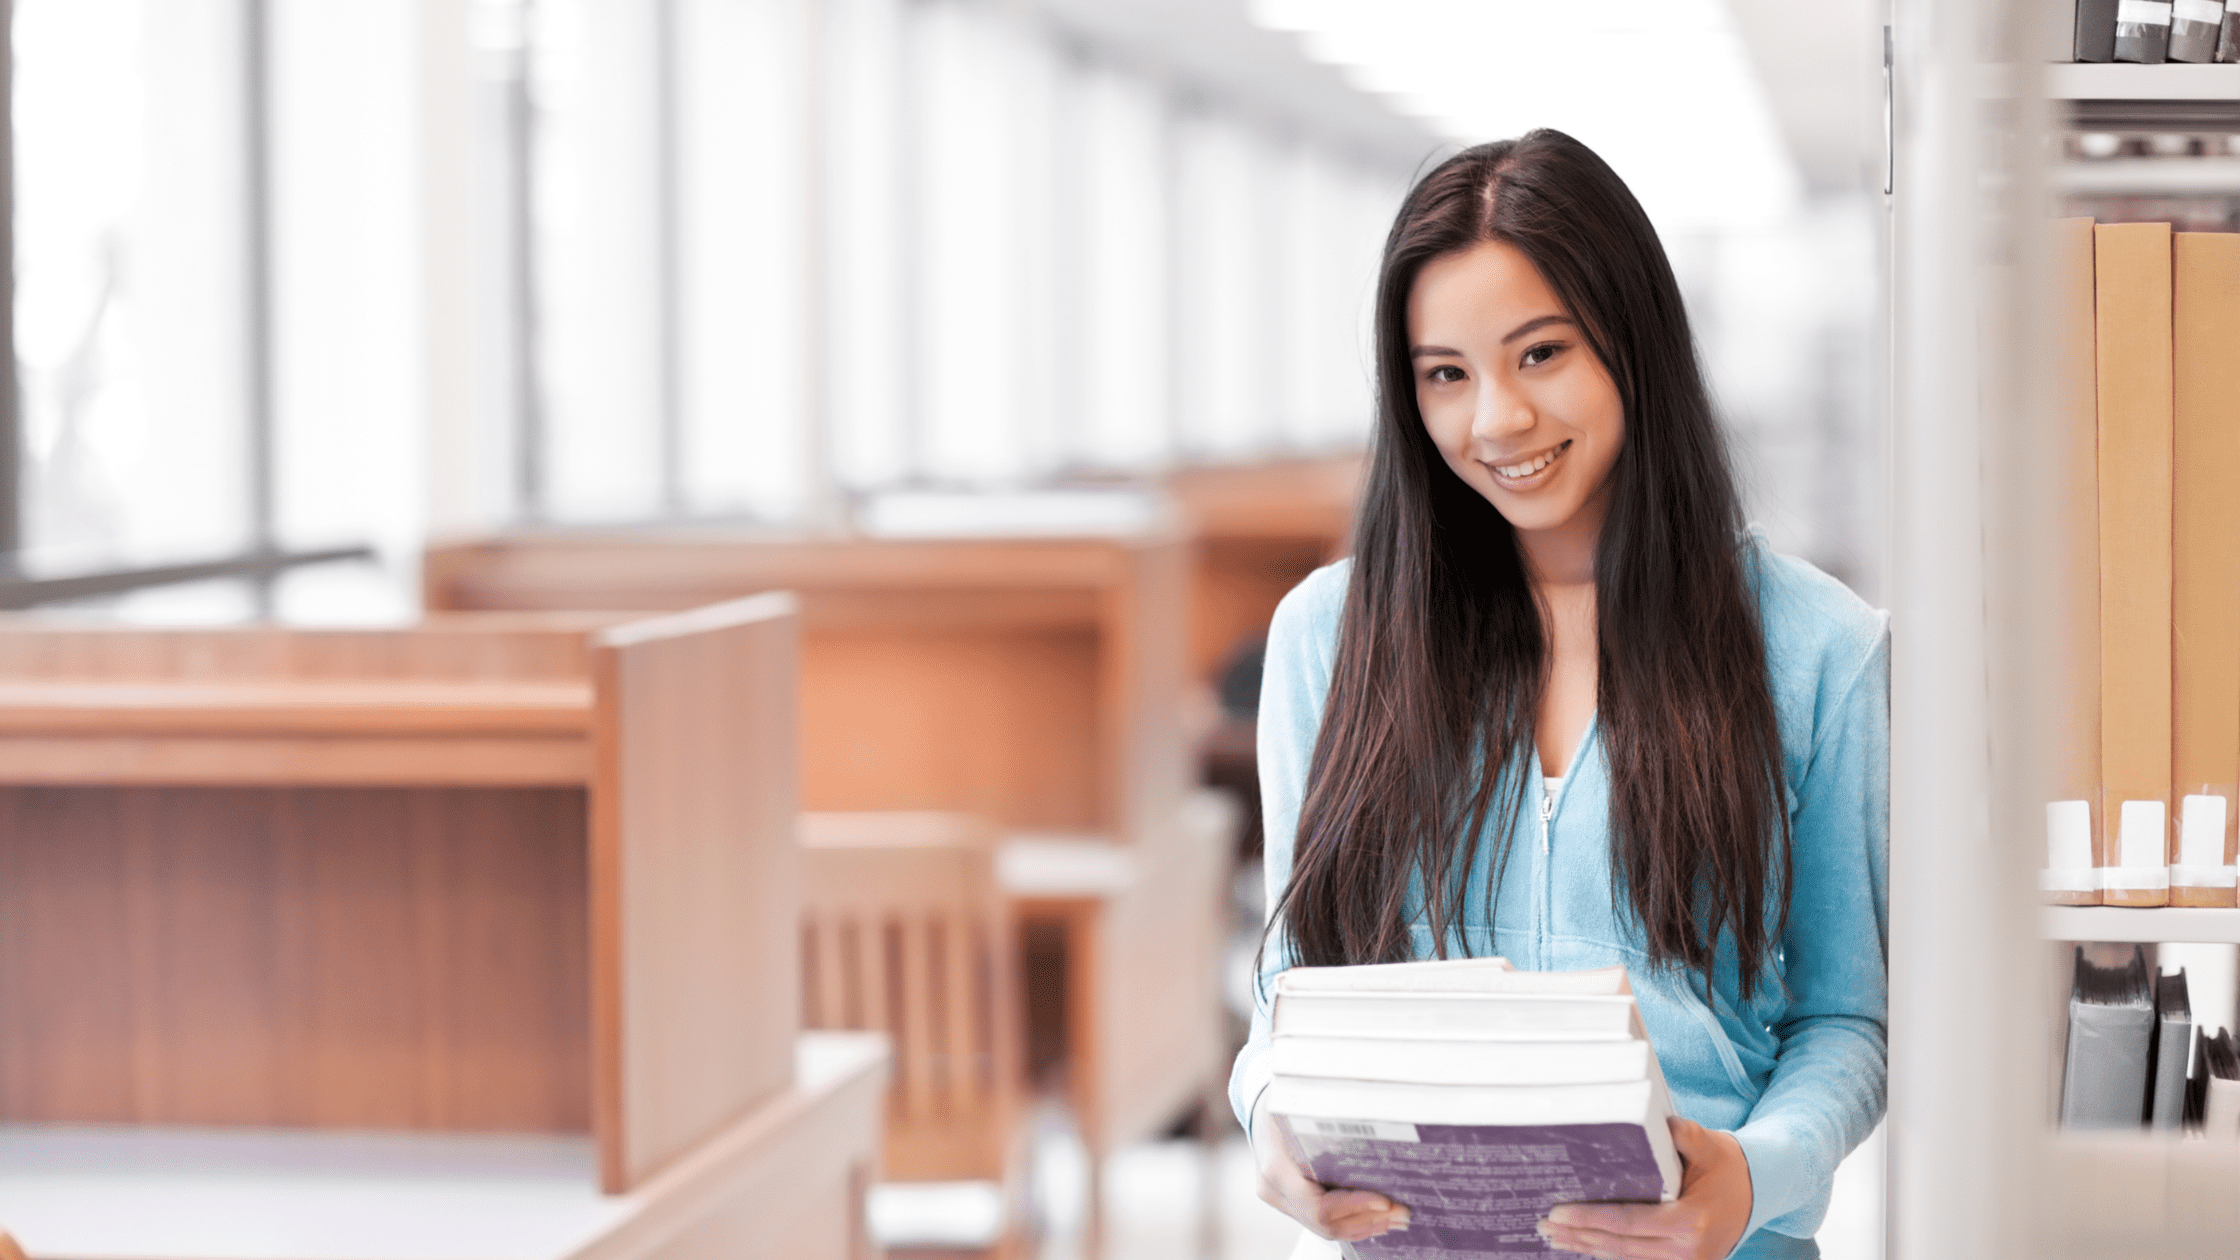 A medical school student in a library holding several Step 2 CK review books.